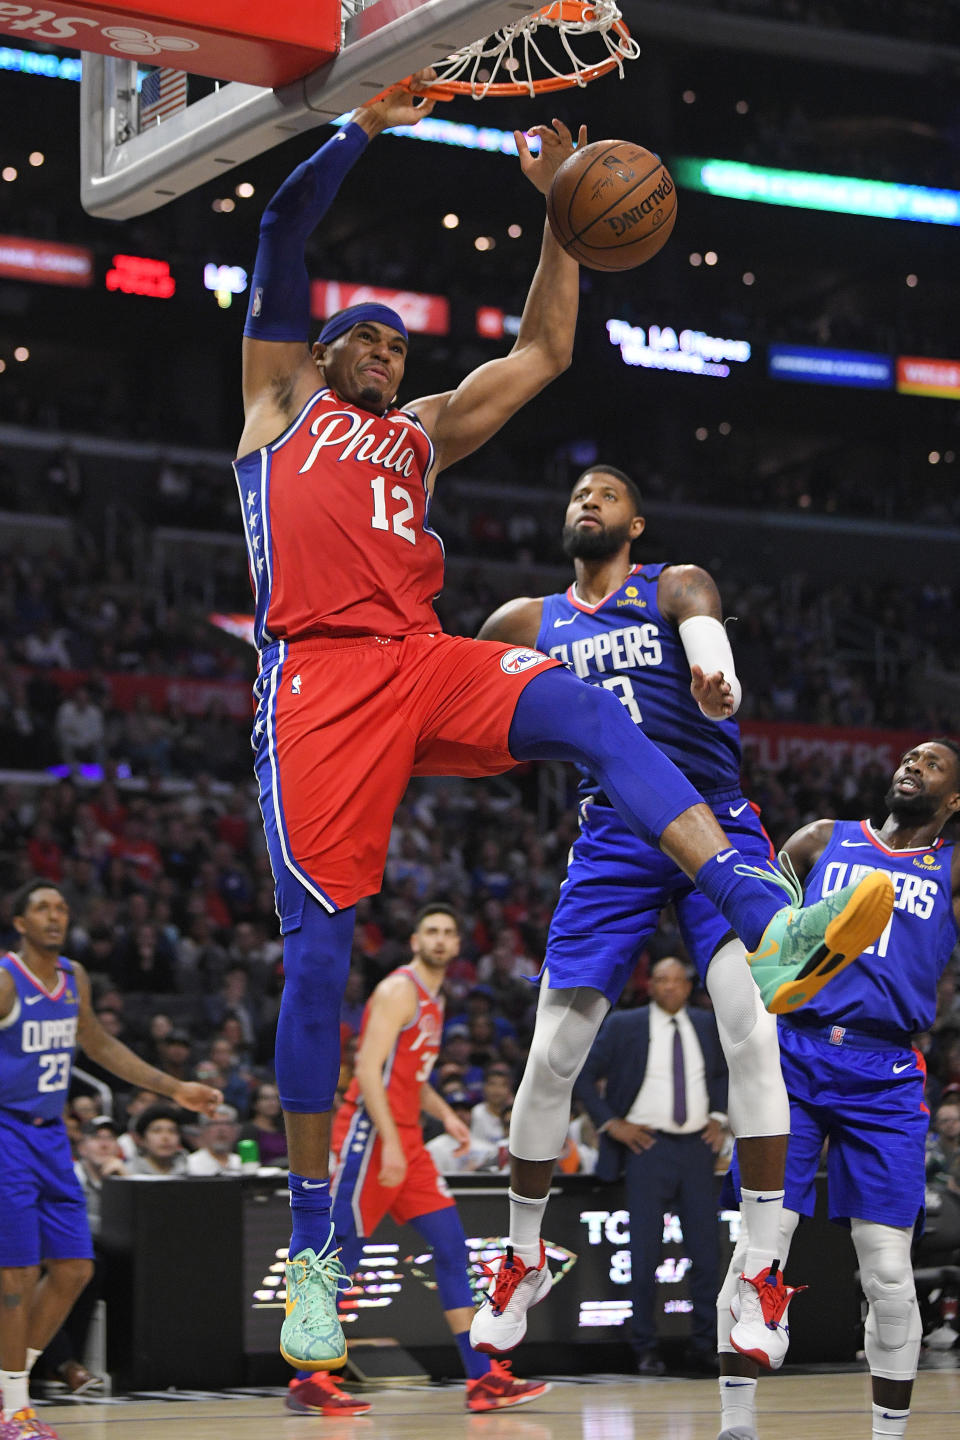 Philadelphia 76ers forward Tobias Harris, left, dunks as Los Angeles Clippers guard Paul George defends during the second half of an NBA basketball game Sunday, March 1, 2020, in Los Angeles. The Clippers won 136-130. (AP Photo/Mark J. Terrill)